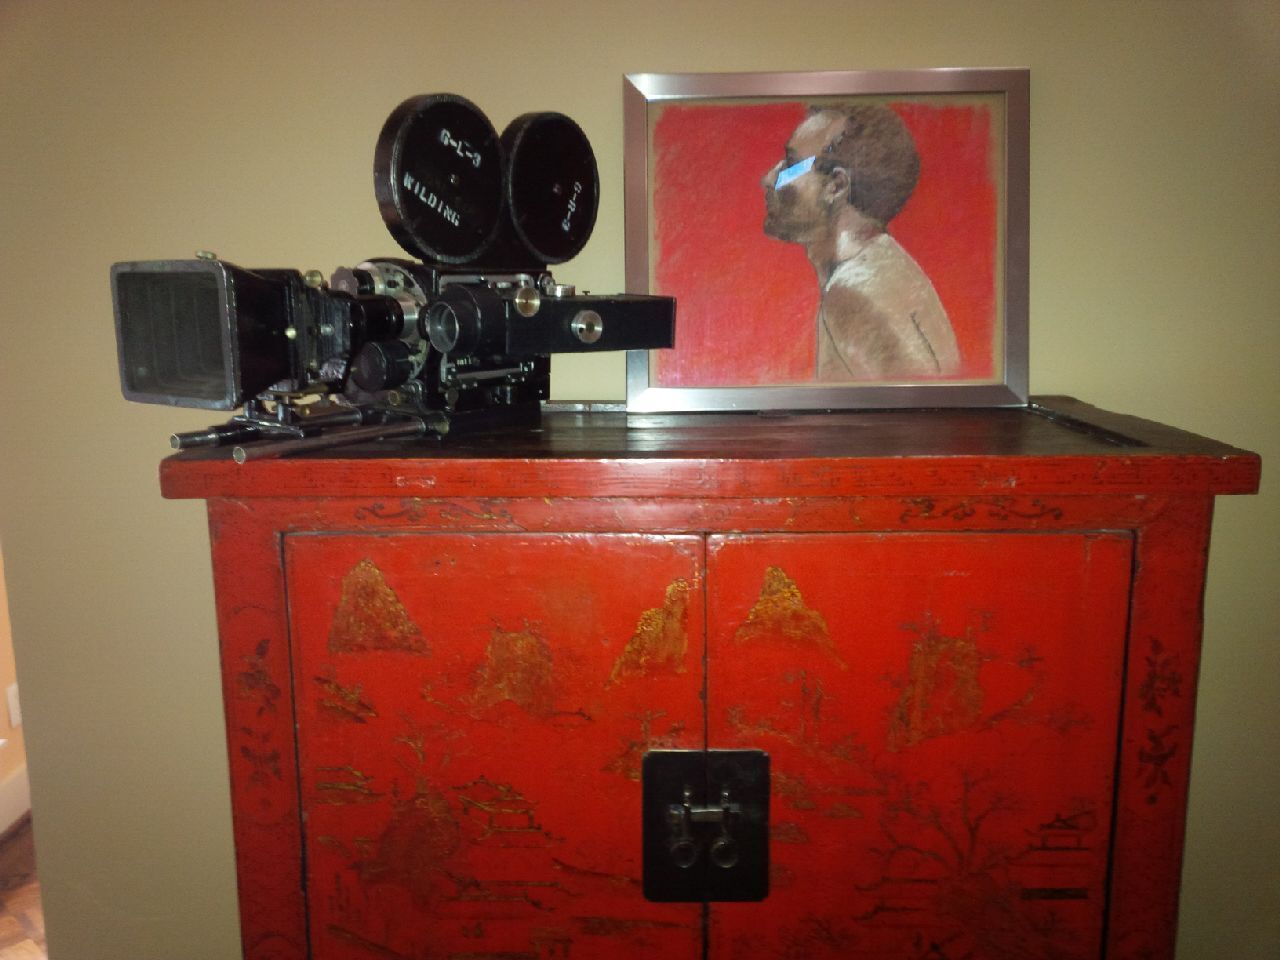 CINEMA ANTIQUES: MOVIE CAMs, STUDIO LITES, MICS Etc. FOR HOME and OFFICE. OFFER